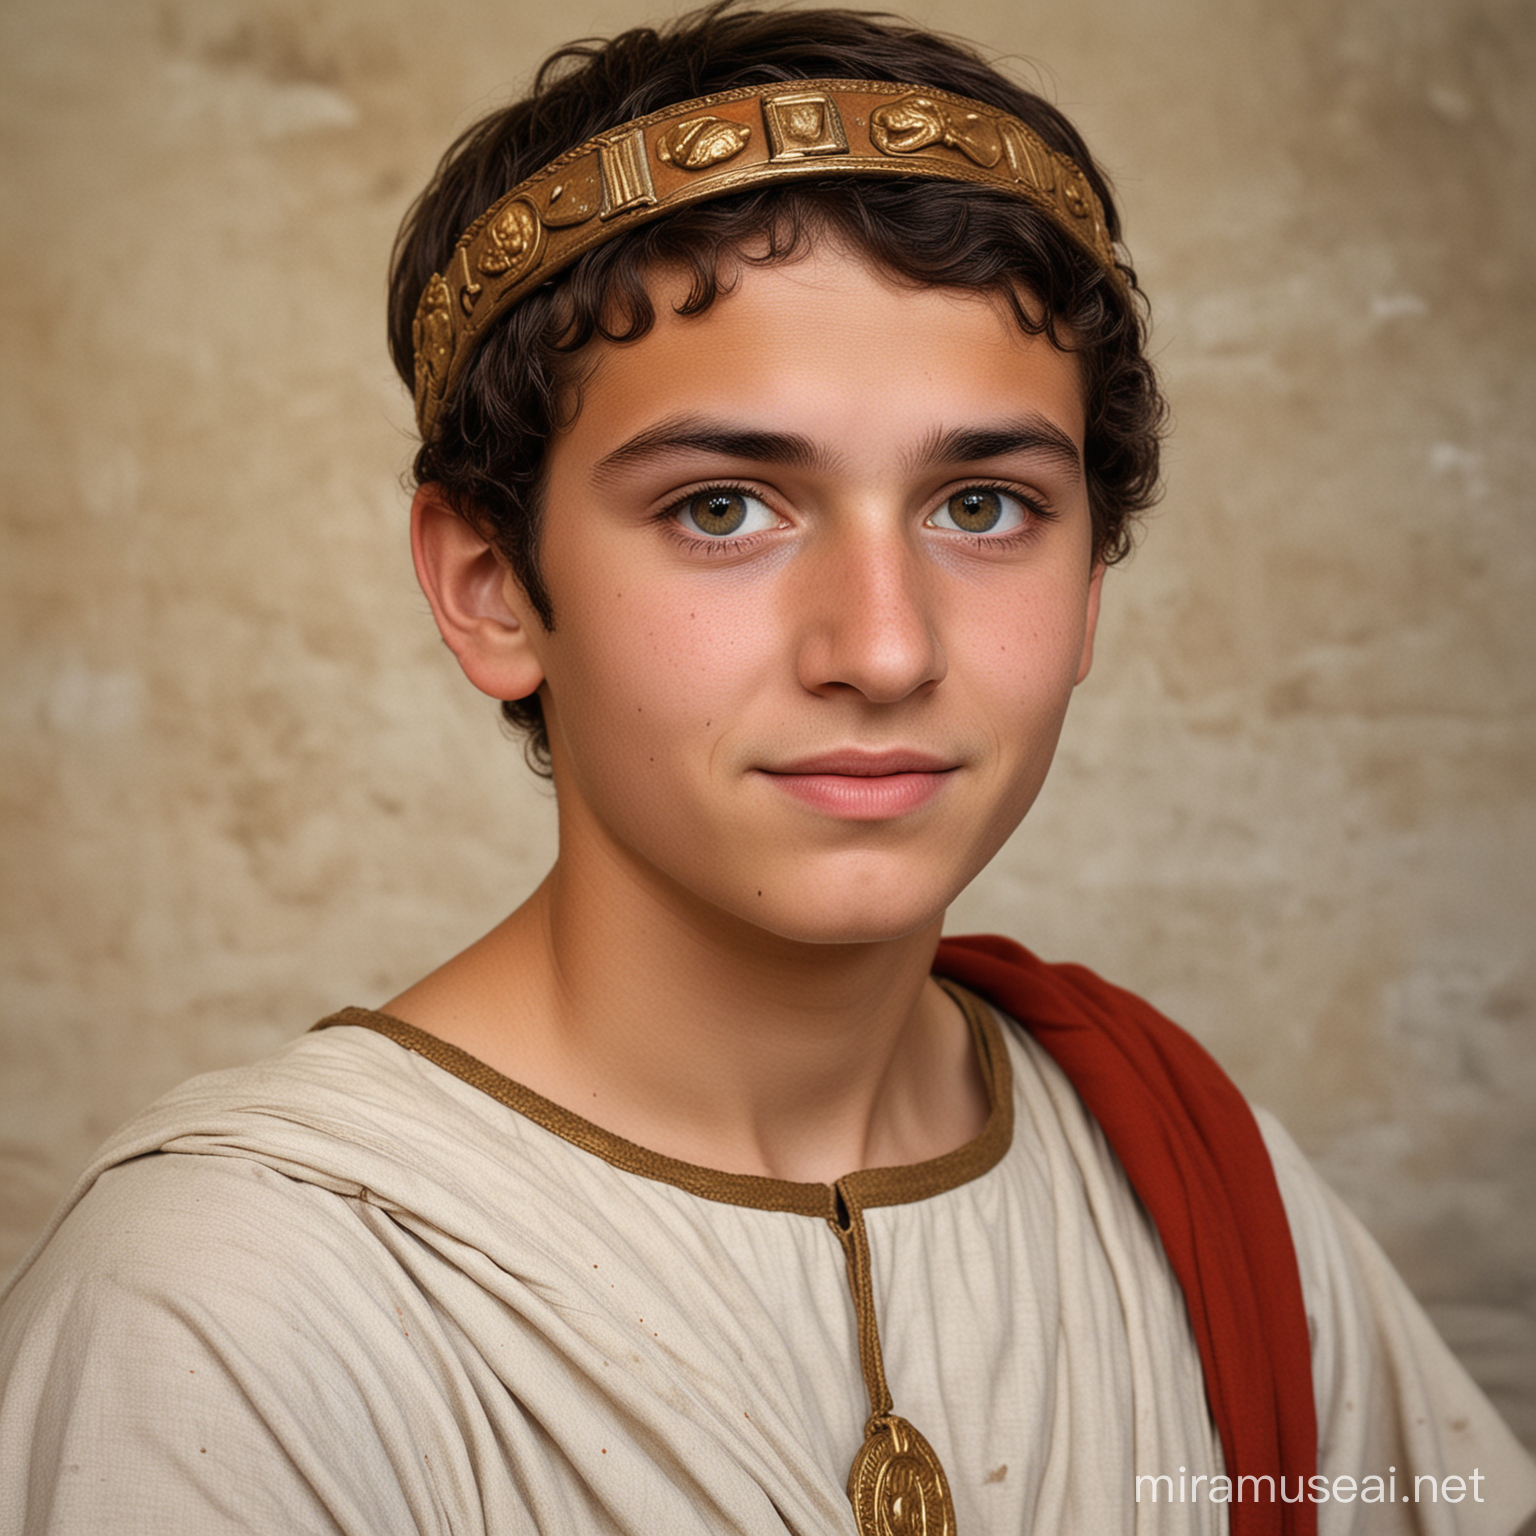 a young person from the roman empire